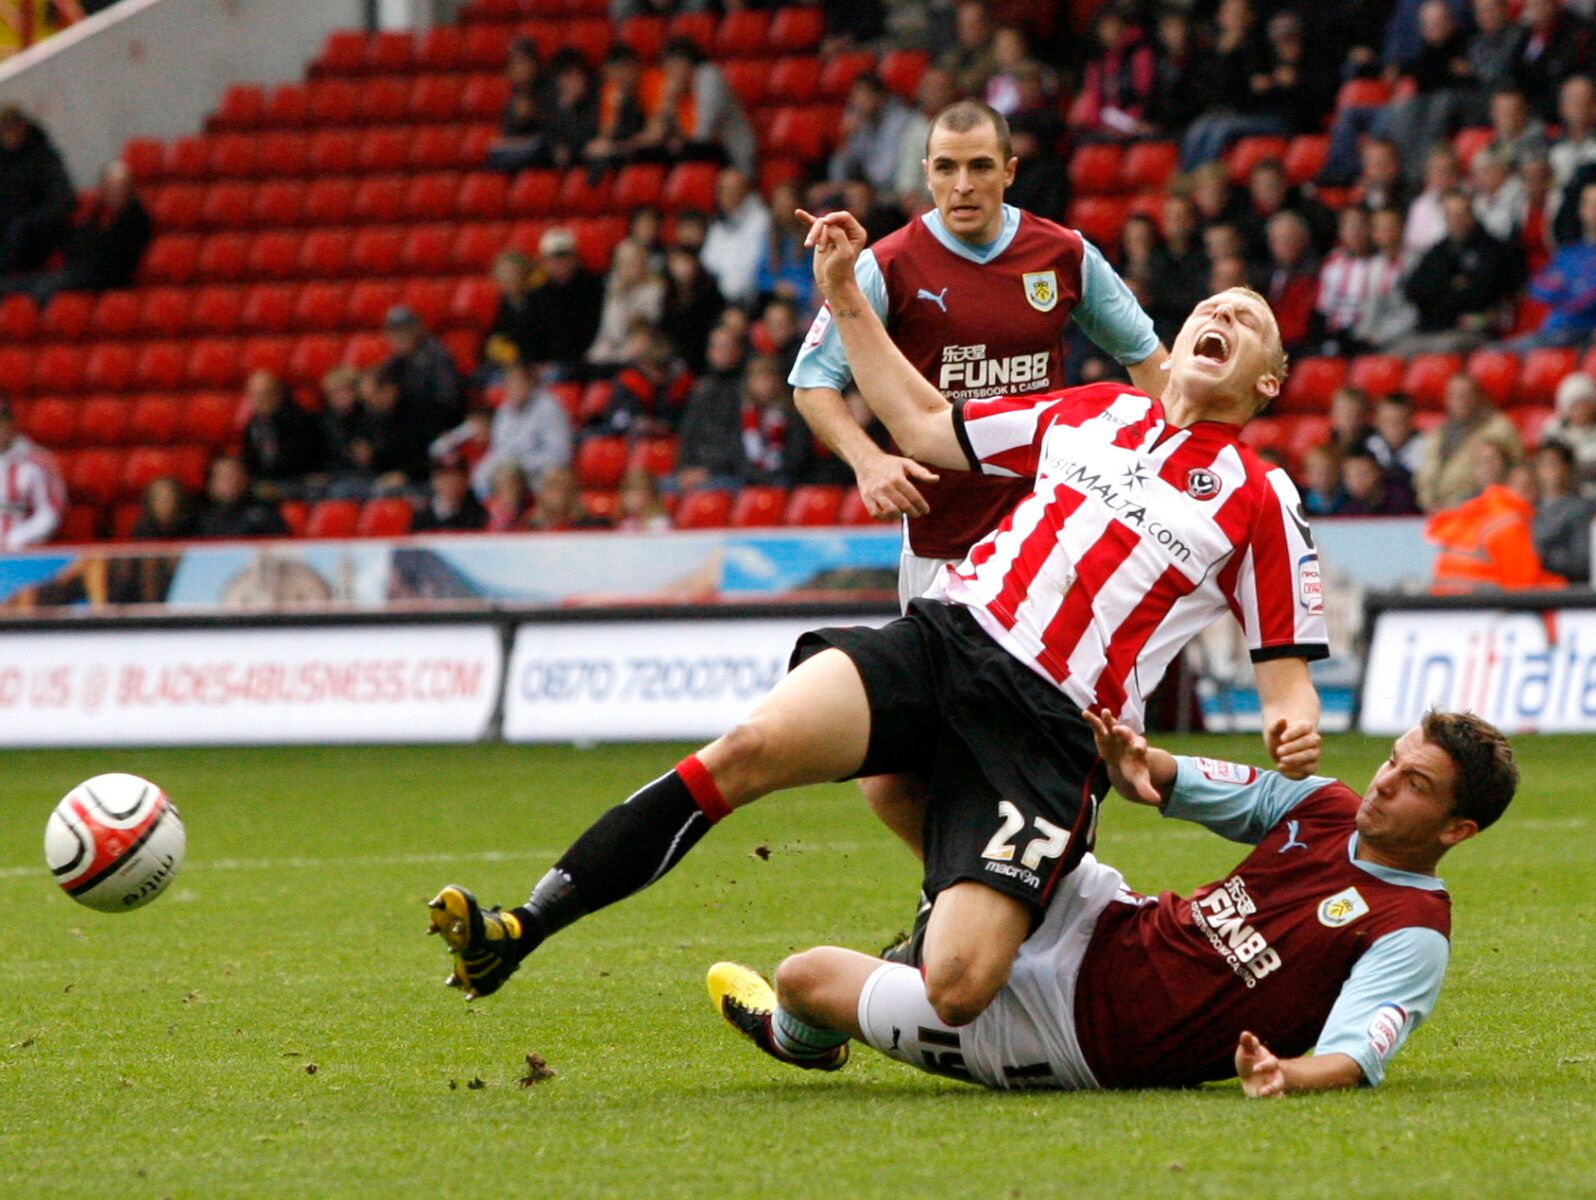 Football - Sheffield United v Burnley npower Football League Championship - Bramall Lane - 10/11 - 16/10/10 
Ritchie De Laet - Sheffield United in action against Daniel Fox - Burnley (R) 
Mandatory Credit: Action Images / Ed Sykes